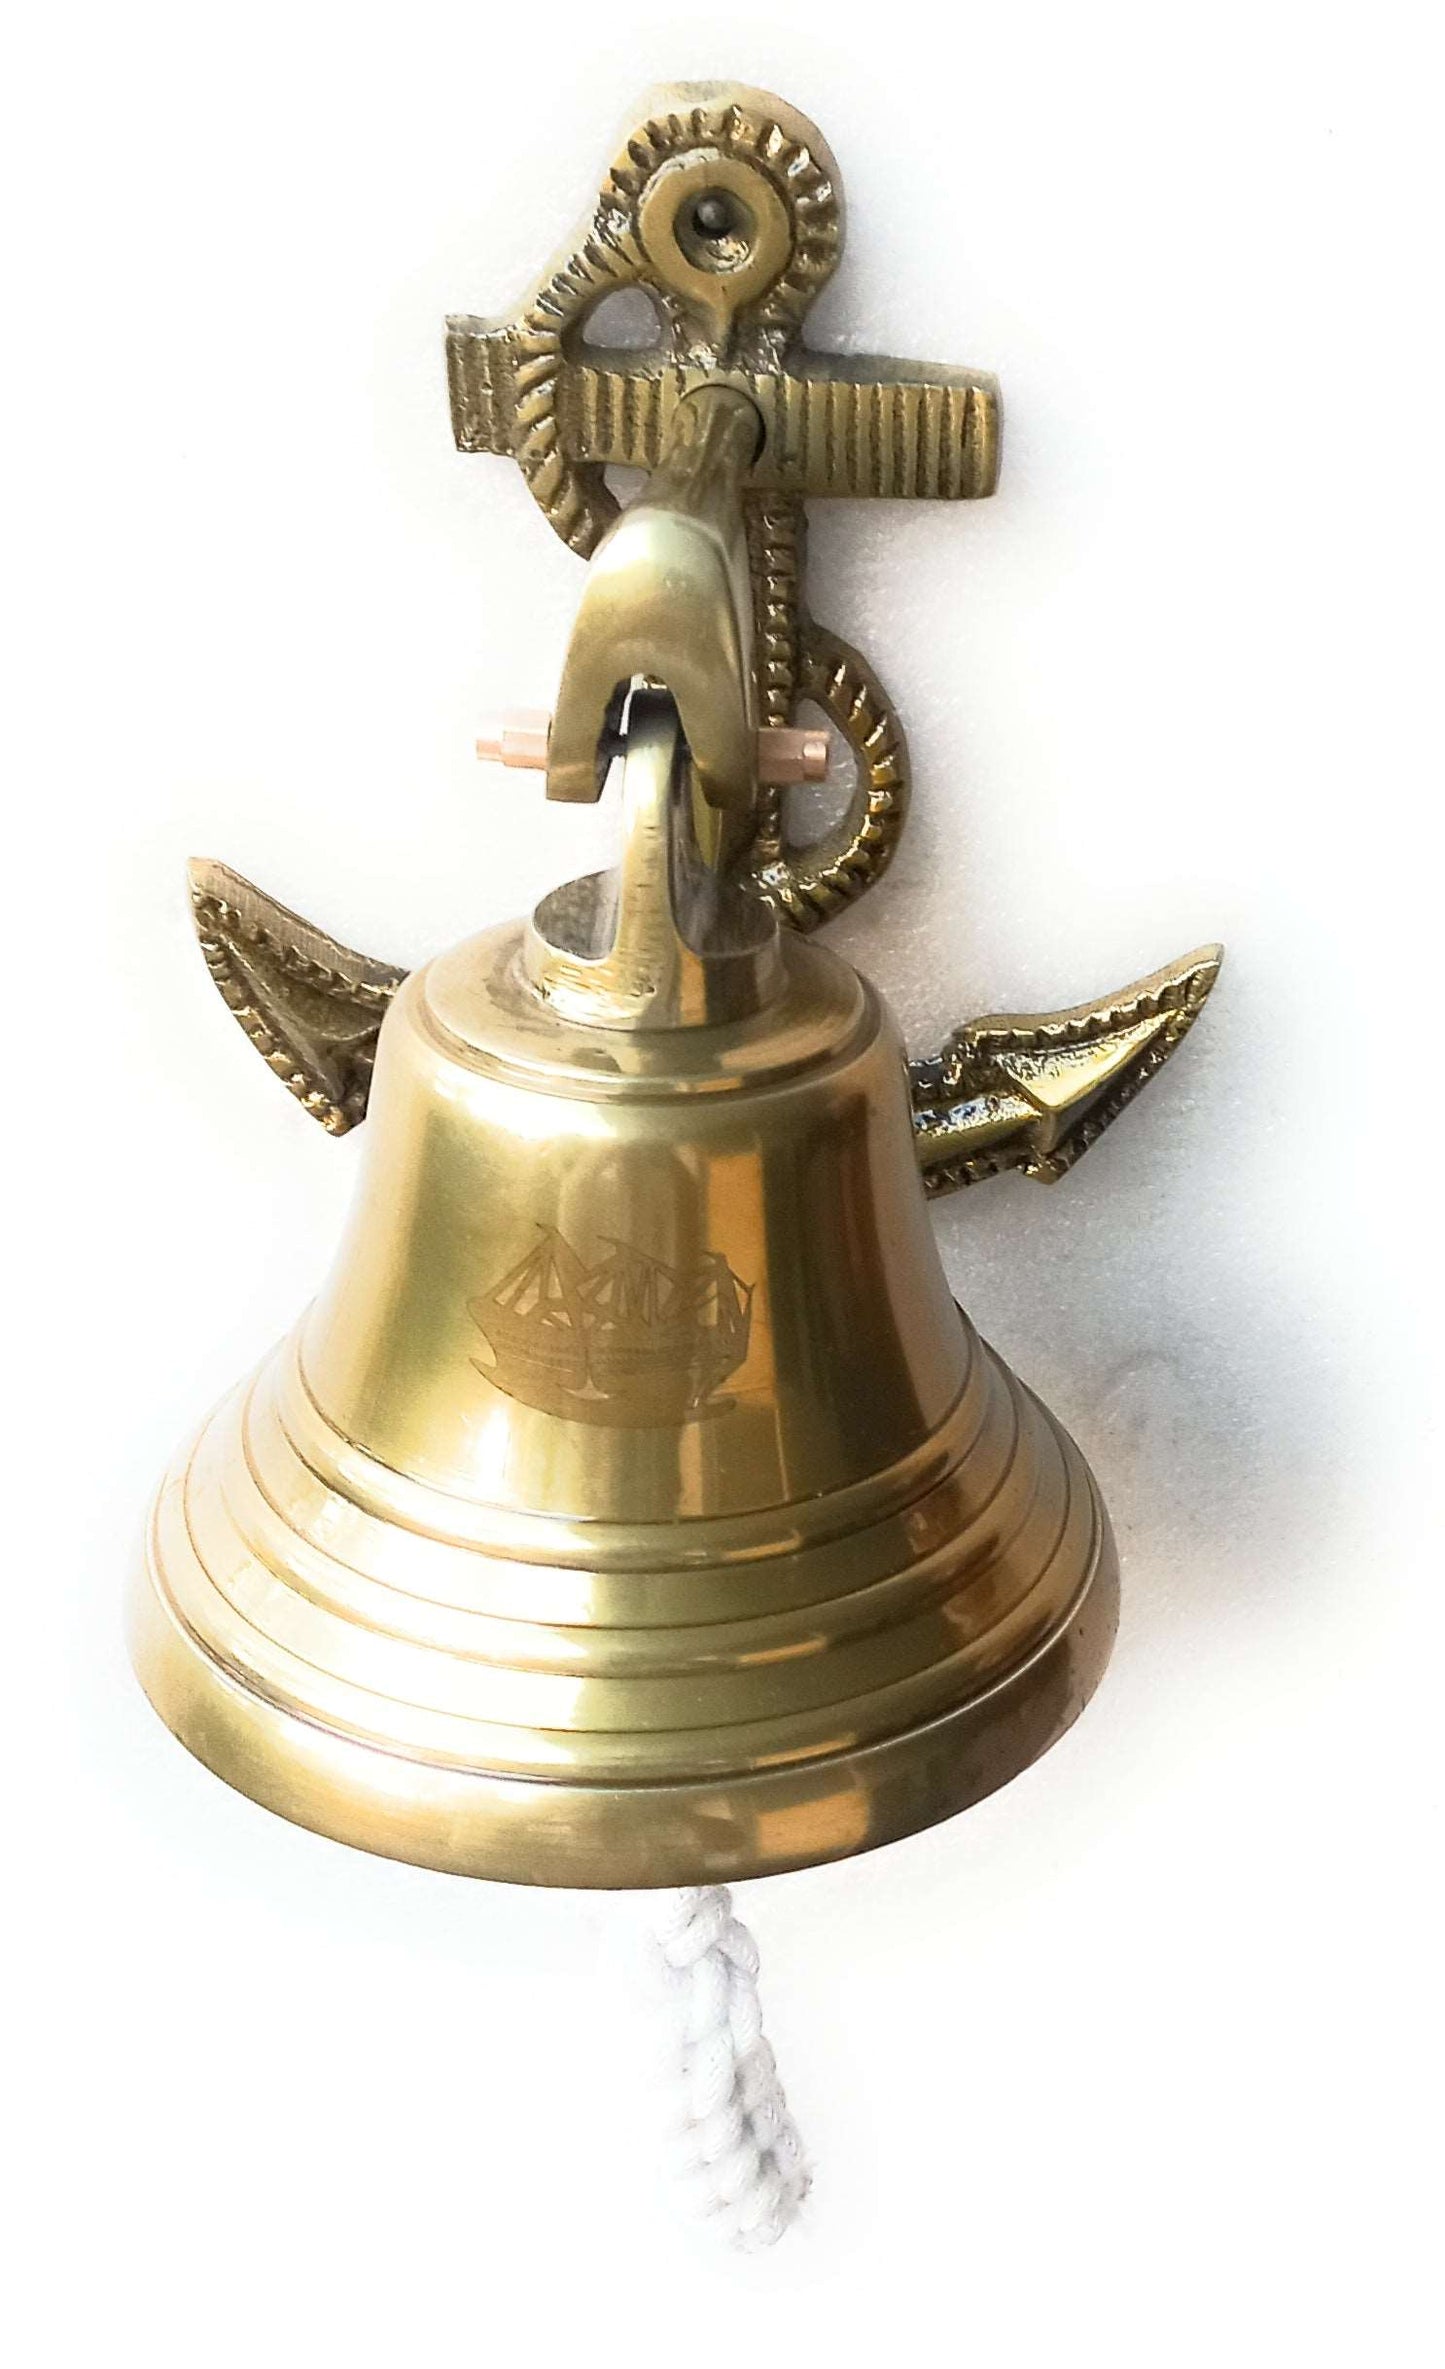 Just Bells is a Melbourne based specialist in Marine Nautical Brass  Handbells & Ships Bells.